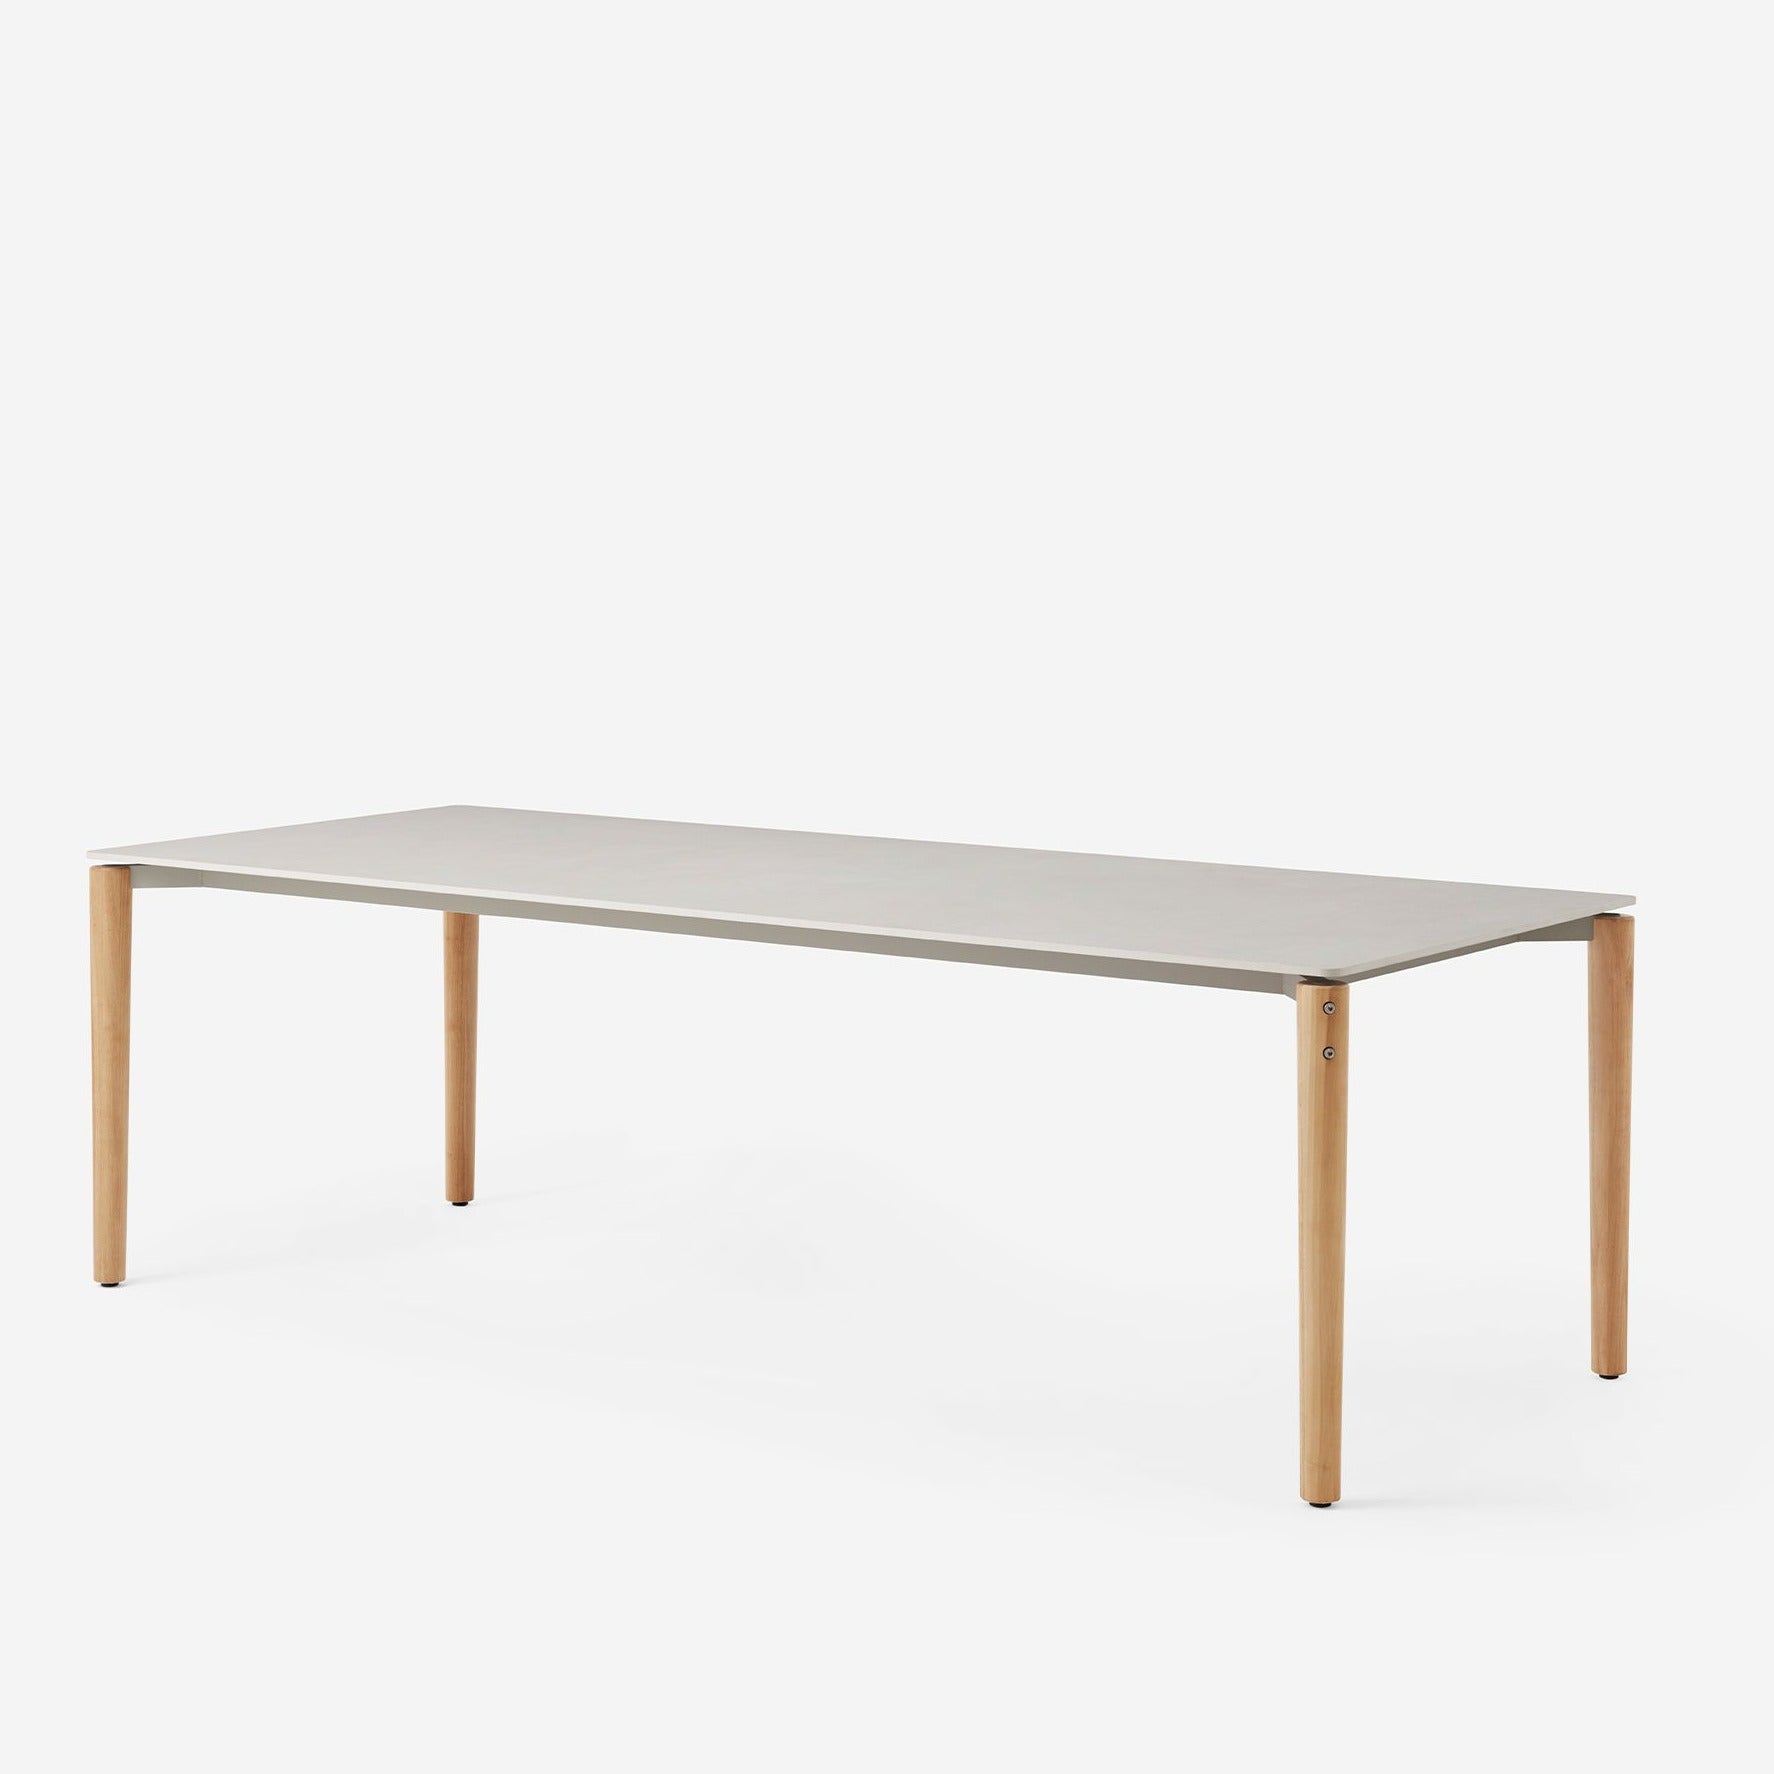 Vipp Open Air Dining Table L250cm